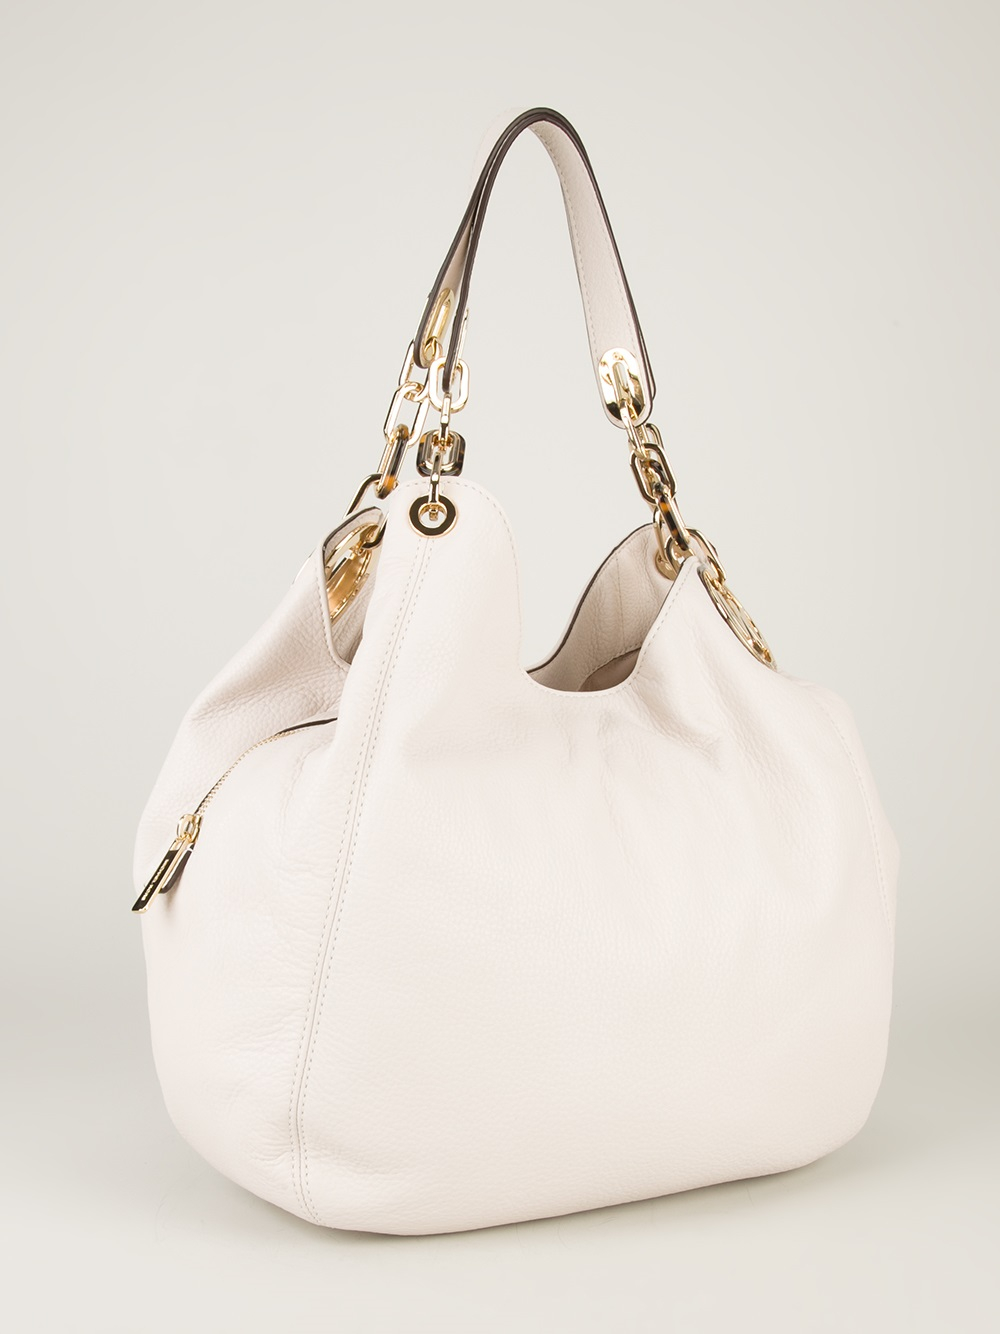 Lyst - Michael kors Slouch Tote Bag in White